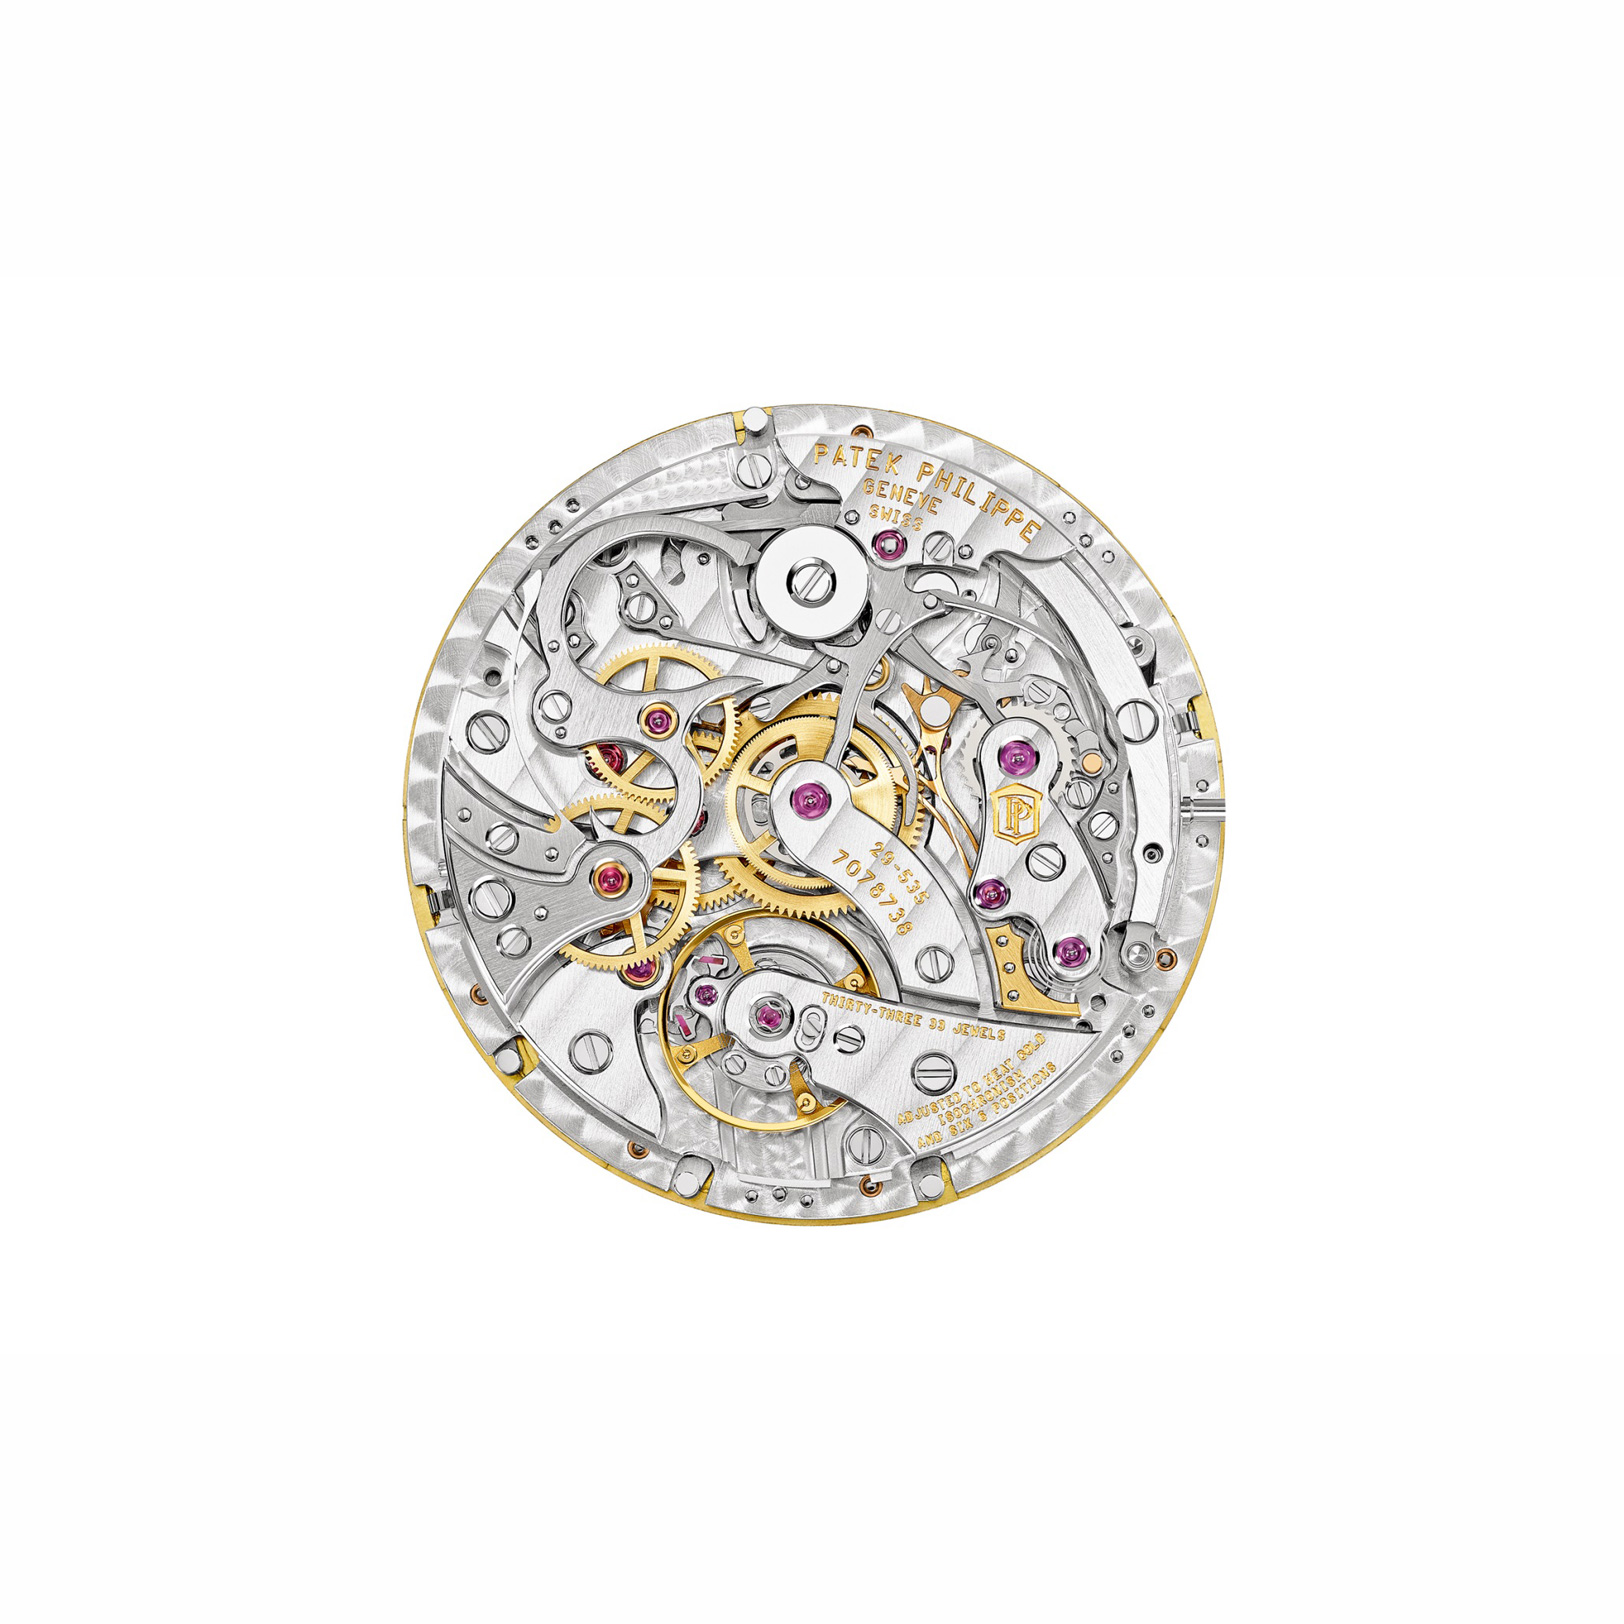 Grand Complications Perpetual Calendar Chronograph Yellow Gold gallery 5